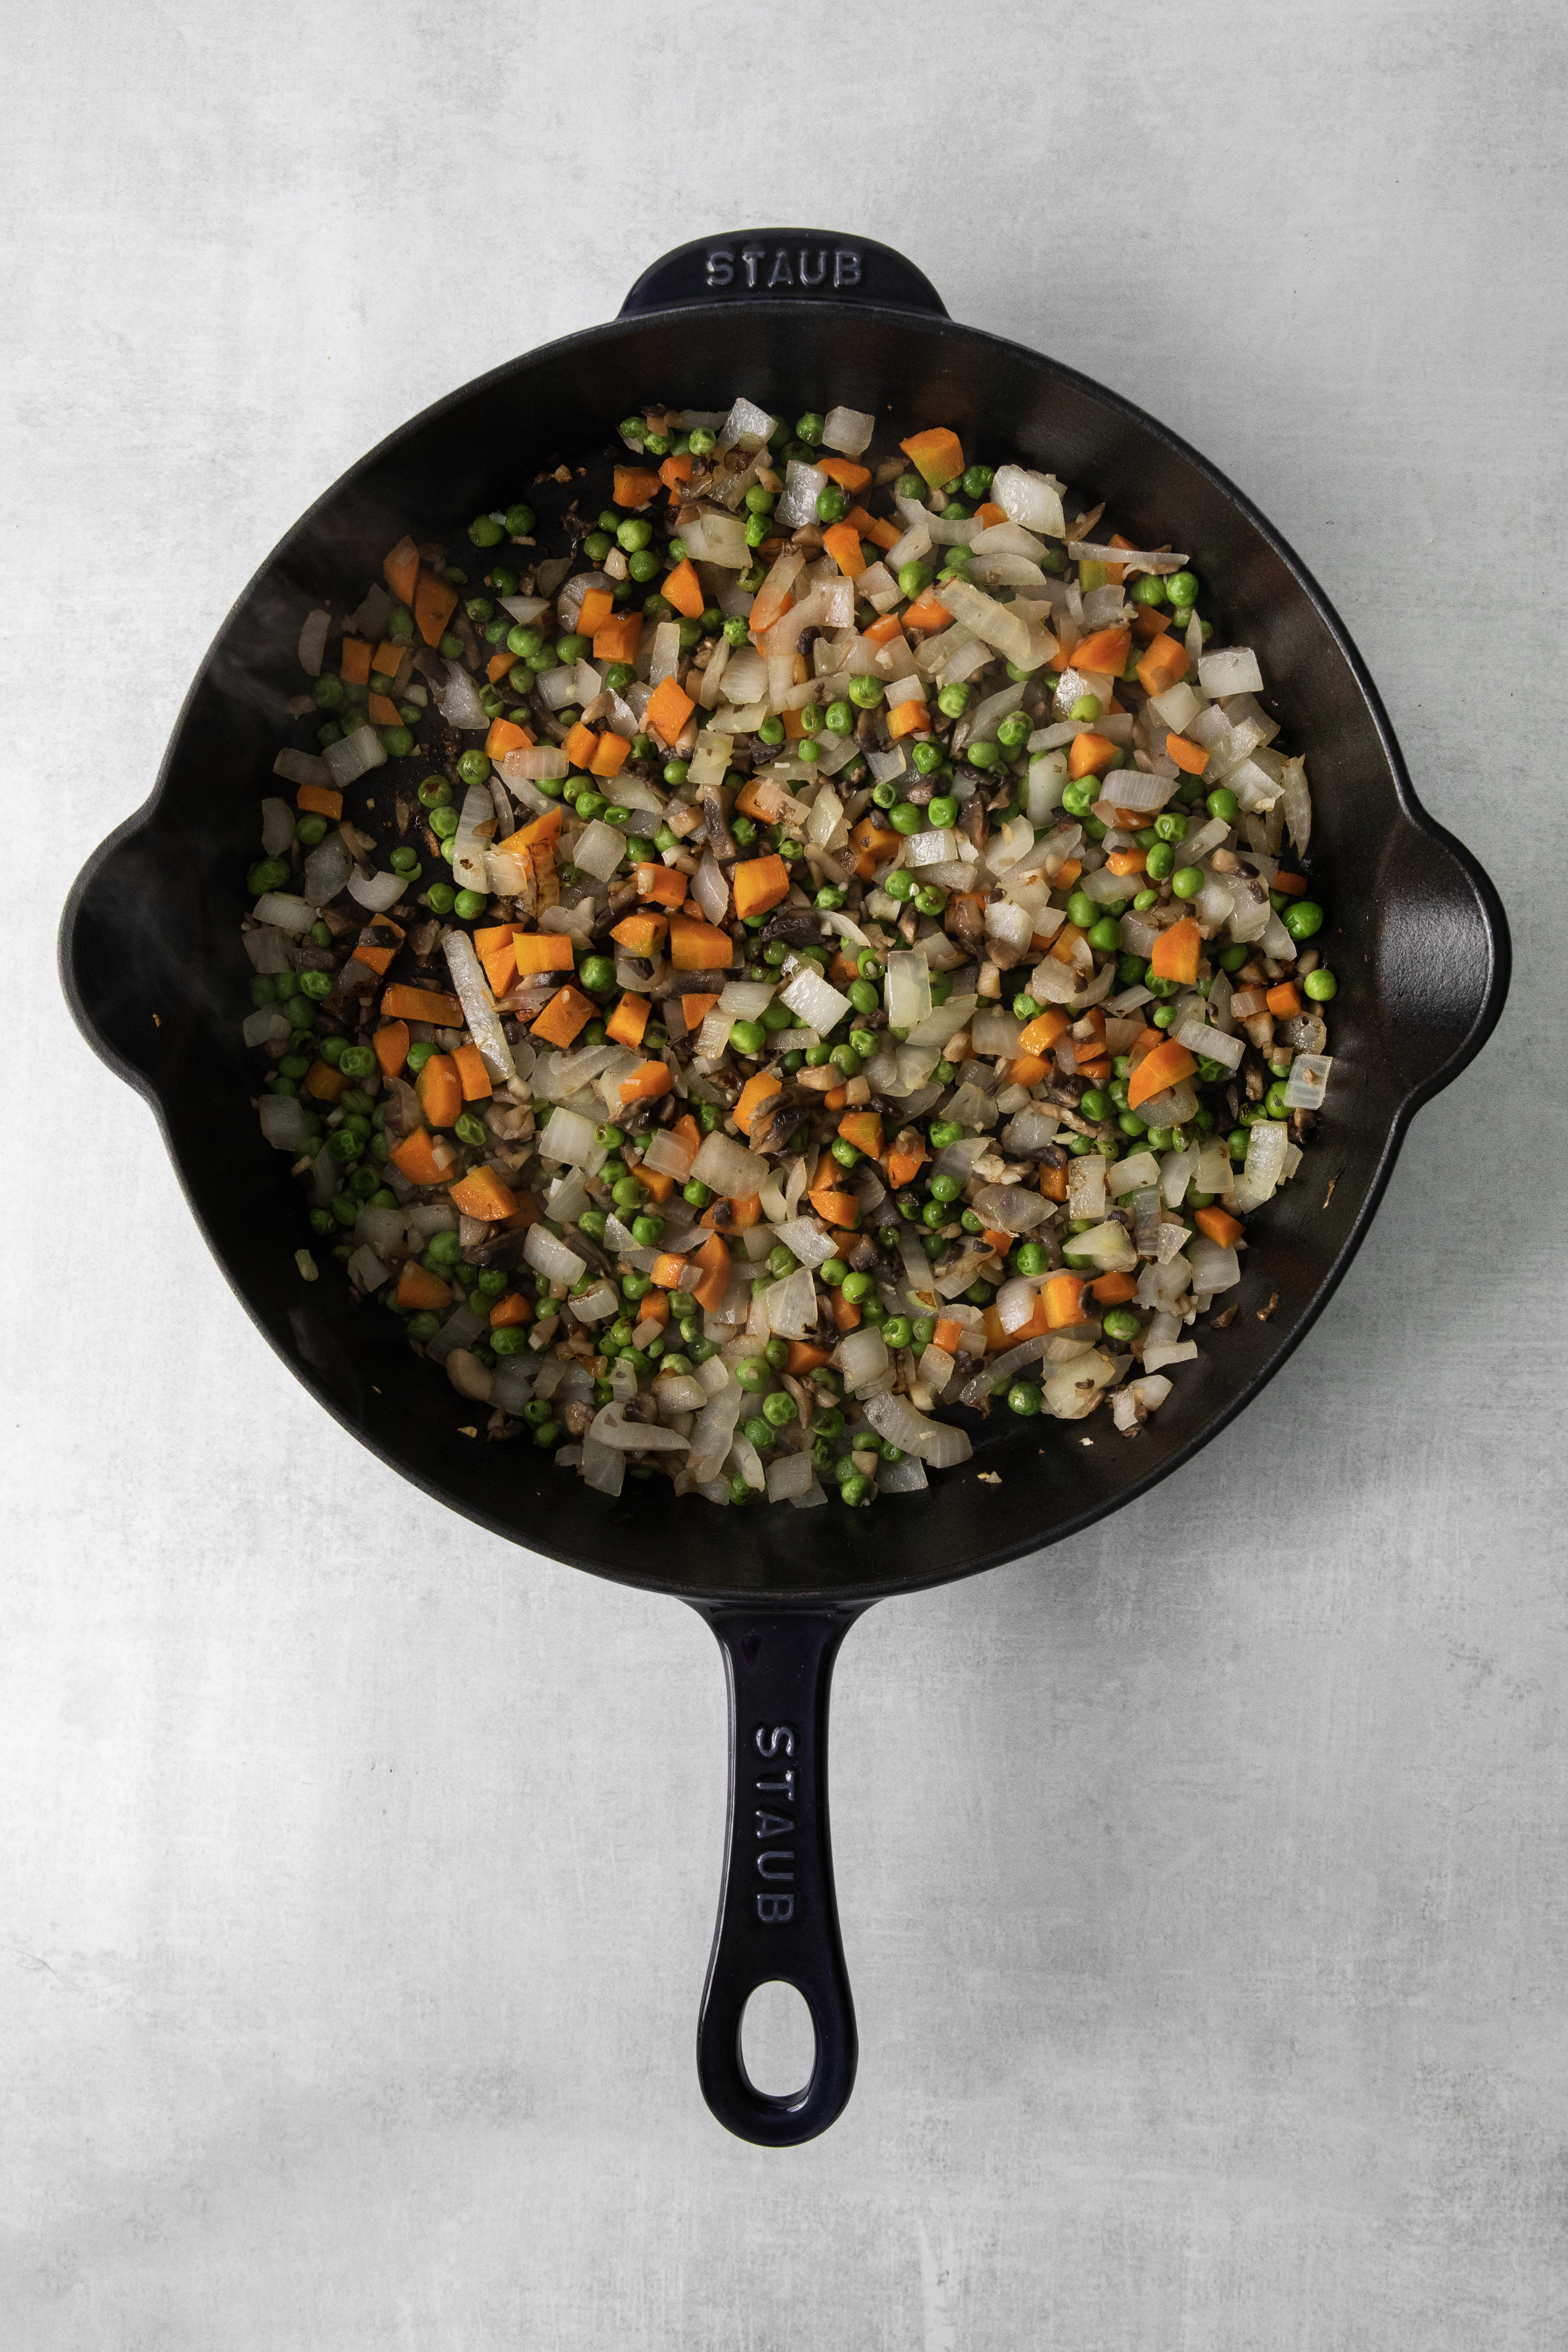 mixed veggies in a skillet.